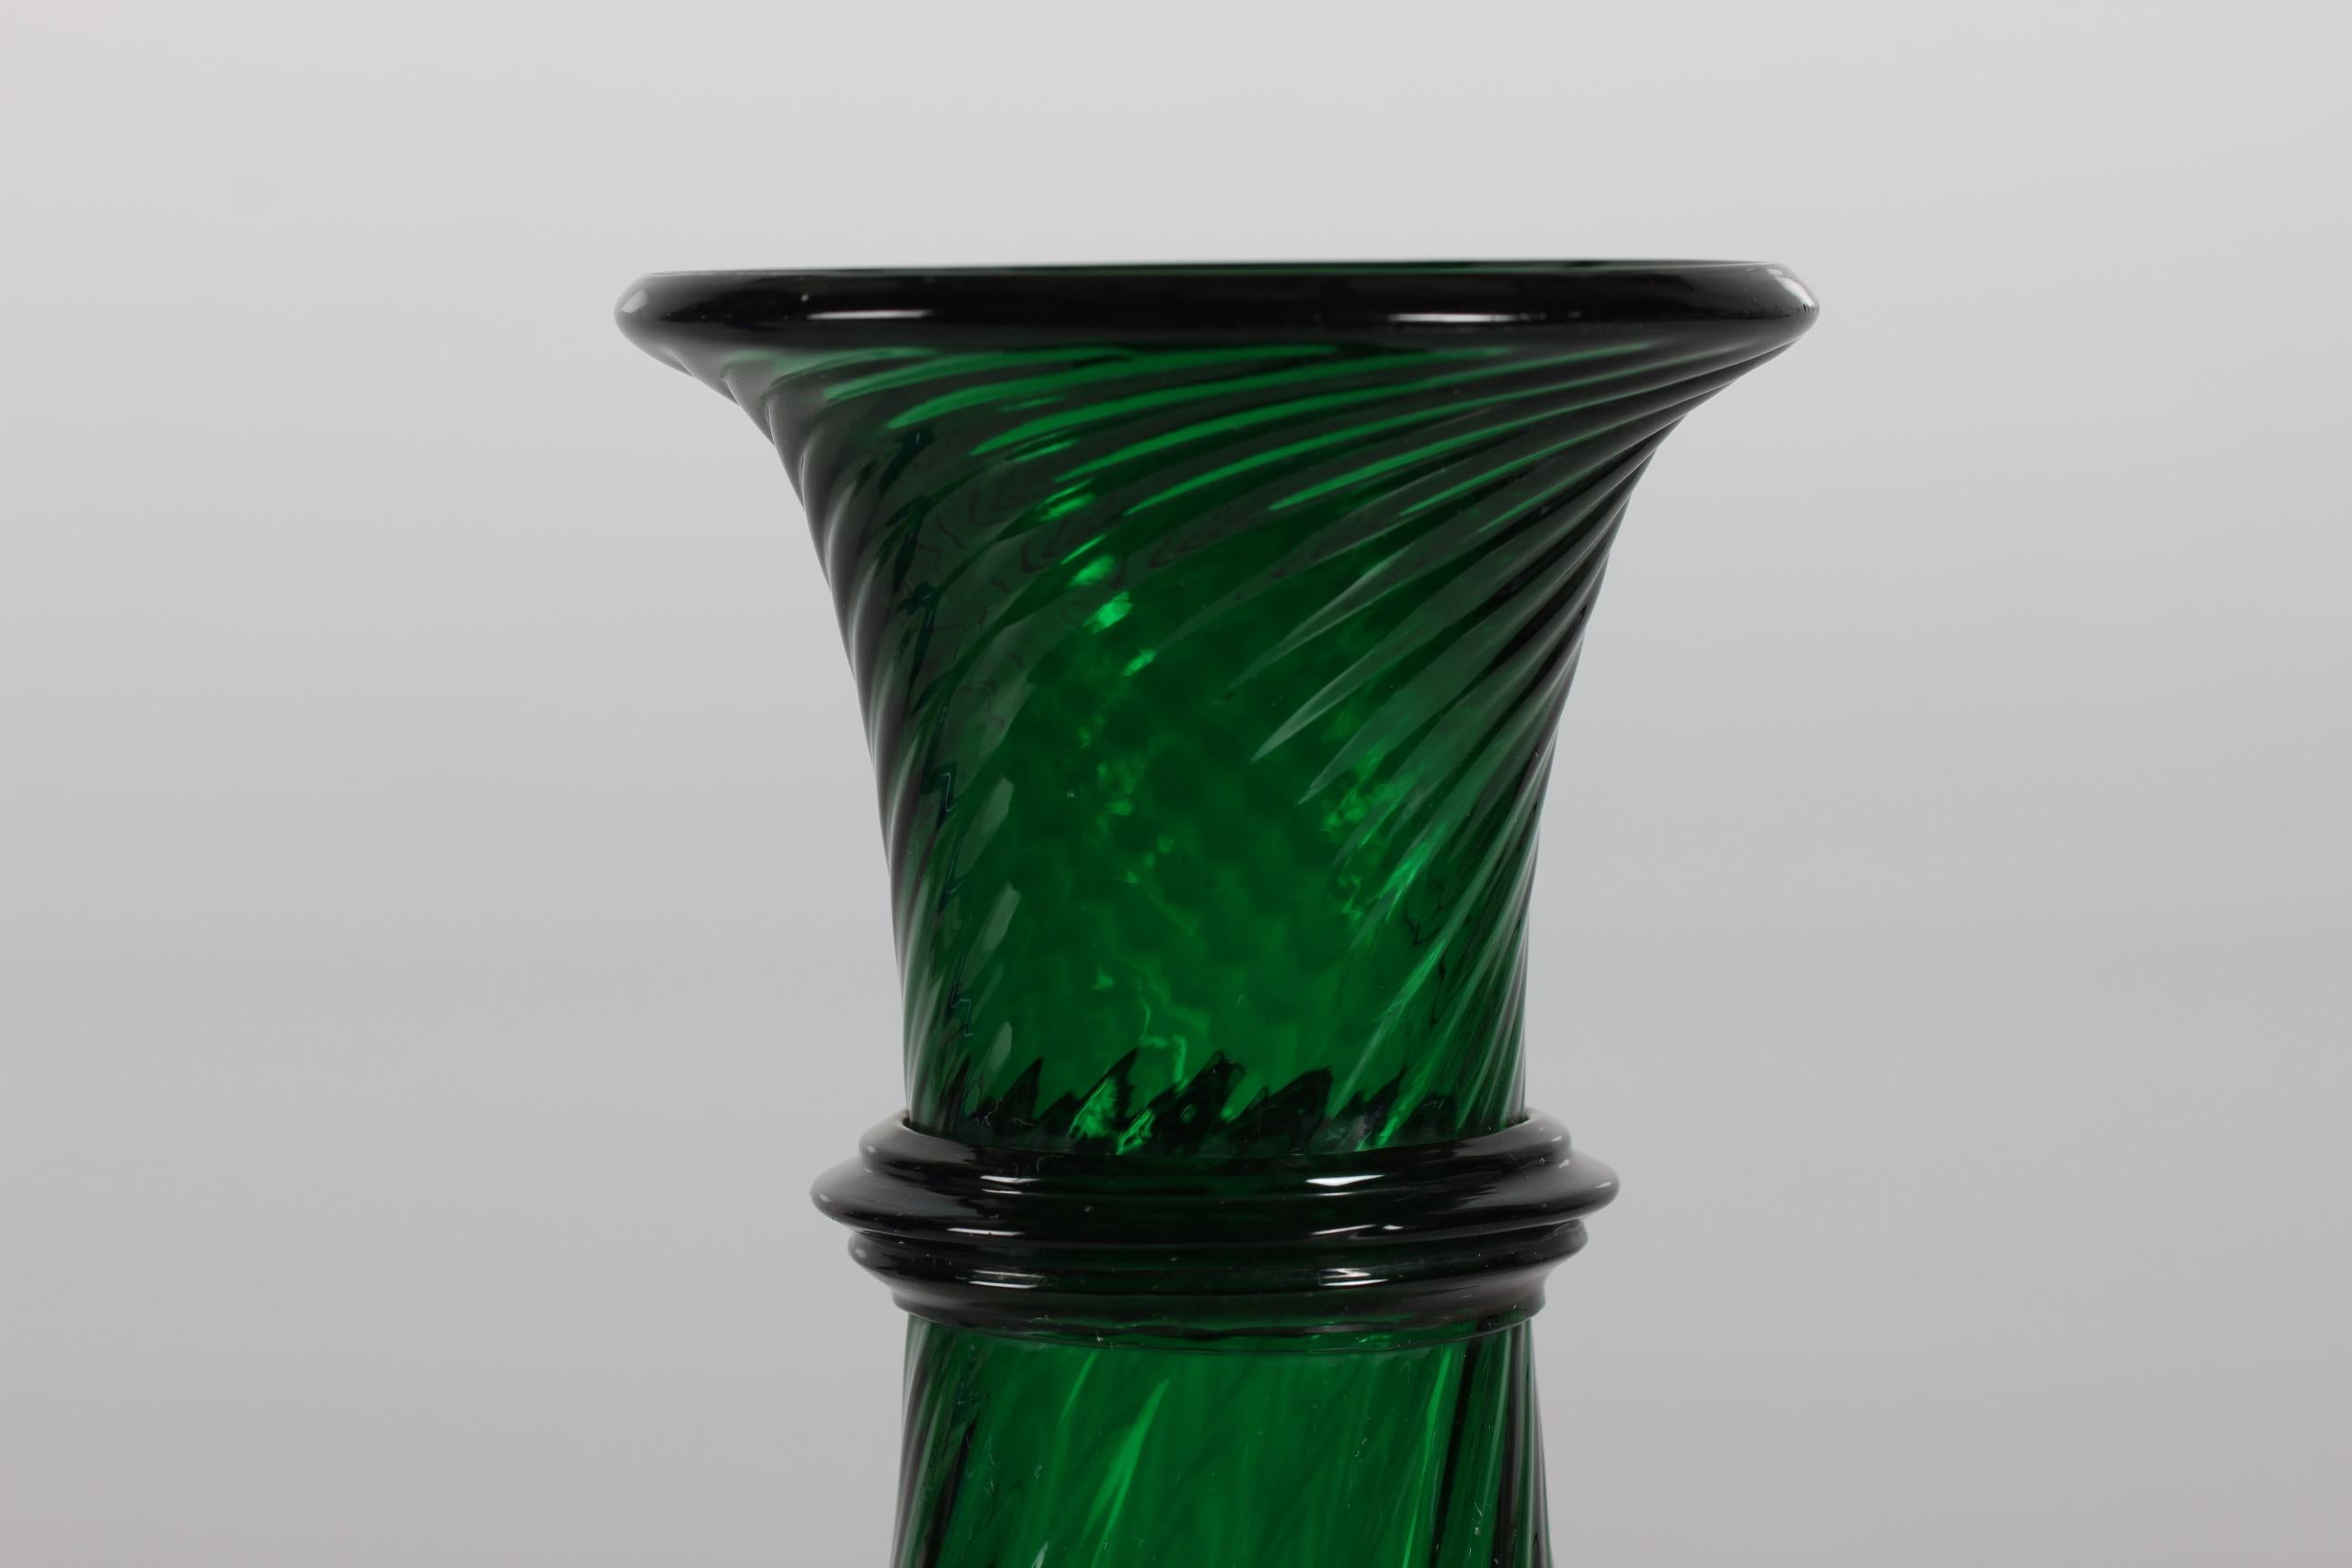 Old Danish hyacinth glass or vase from Holmegaard or Kastrup glassworks, circa 1900.

The hyacinth glass is made of dark green mouth blown glass and it has a elegant baluster form on a small foot. There is a lightly twisted pattern in the glass